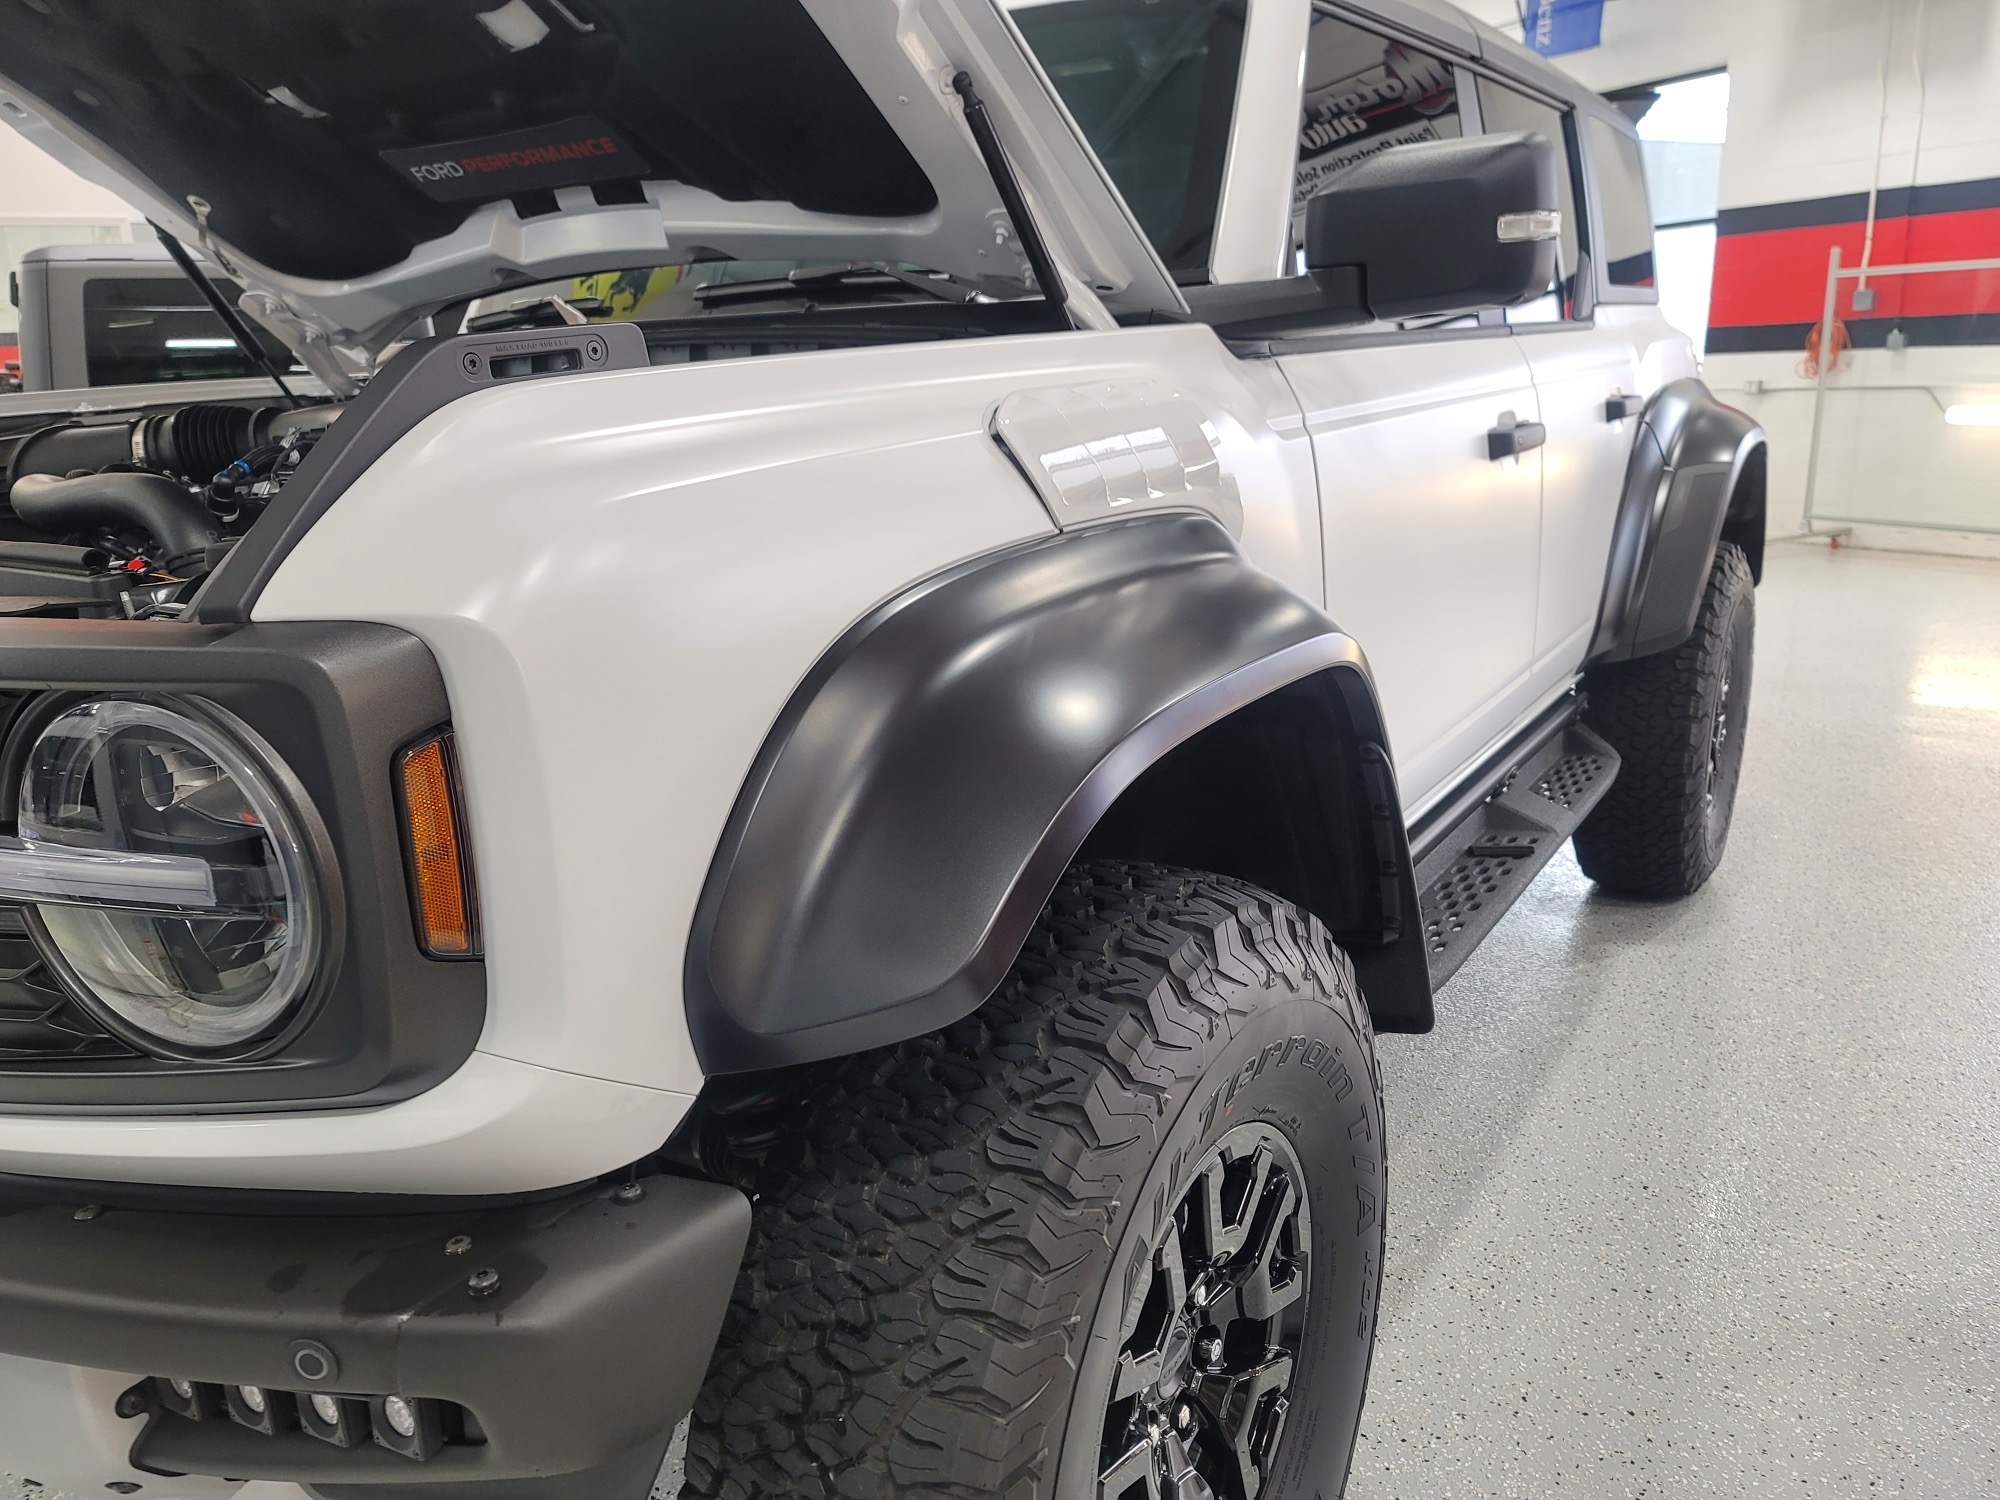 Ford Bronco XPEL Stealth PPF Wrap Completed on Bronco Raptor in Oxford White Resized_20230502_133721